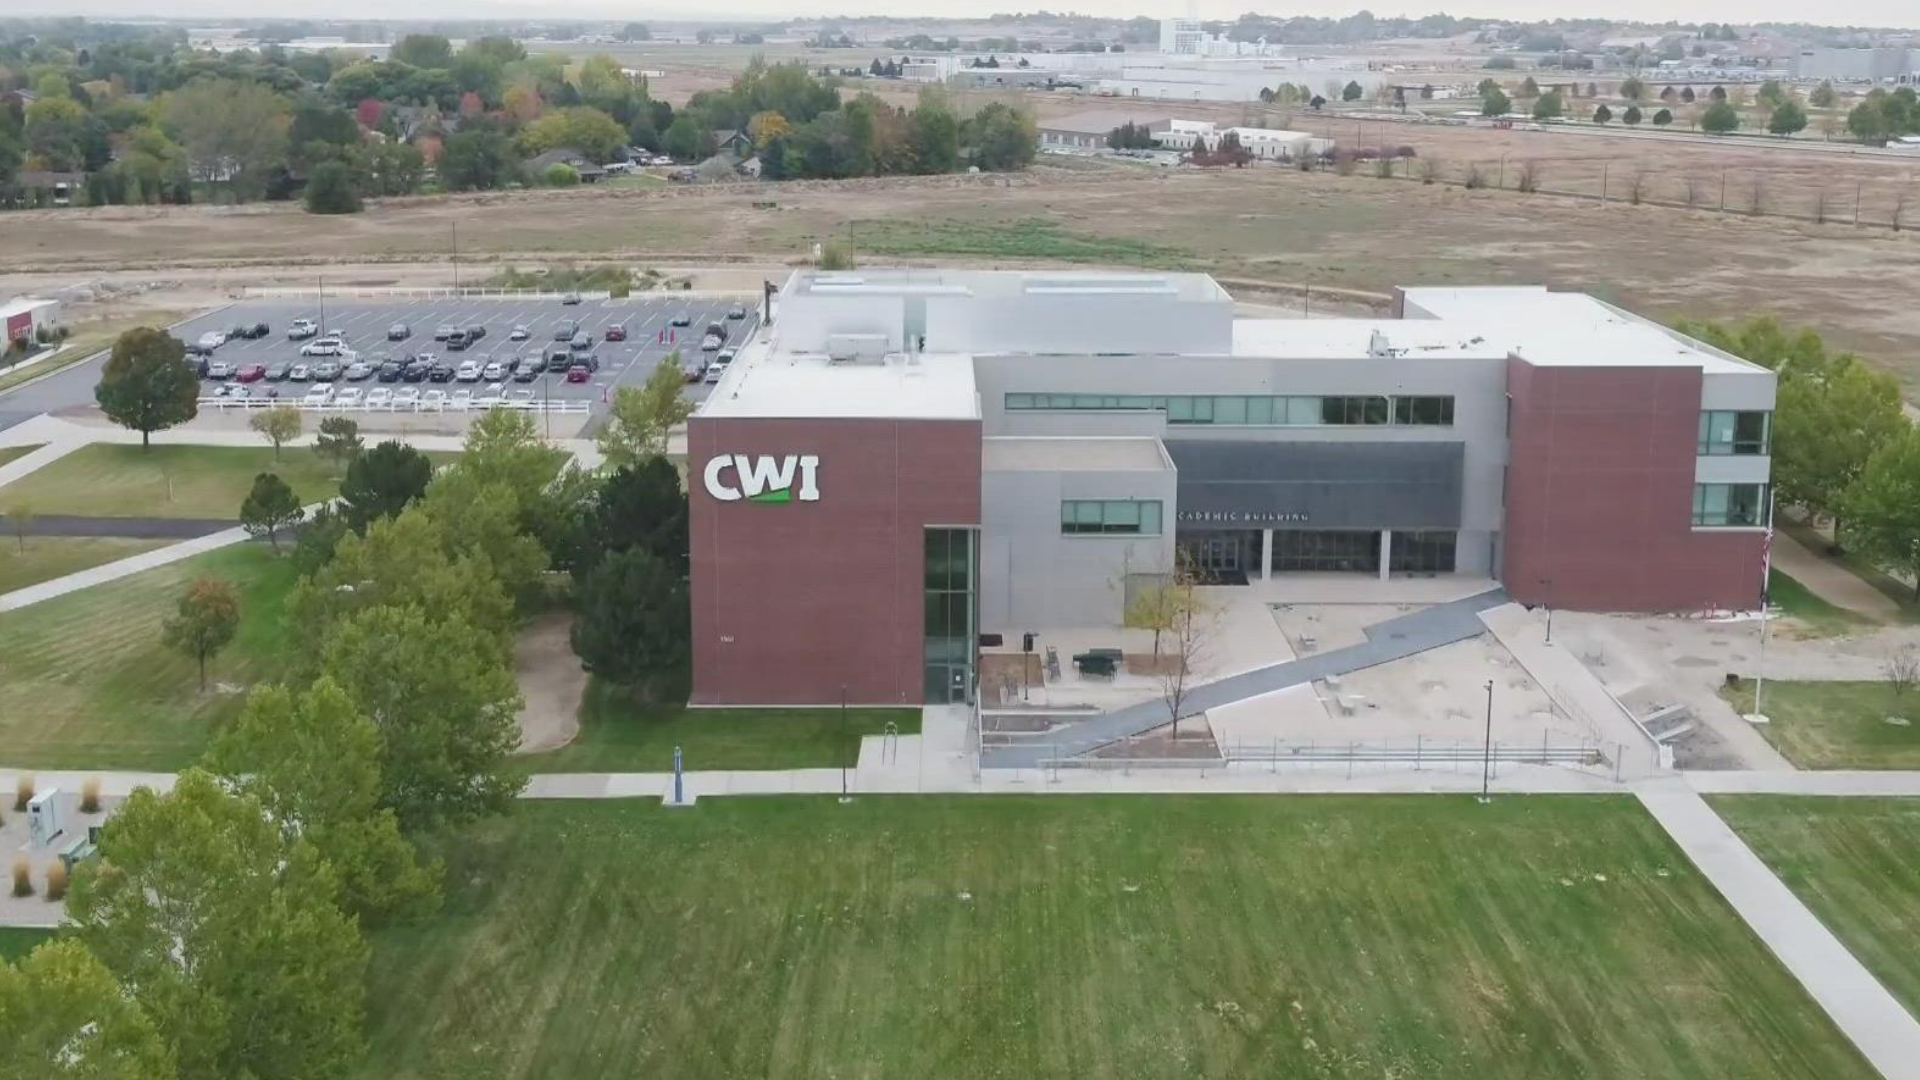 CWI has three major projects in the works to grow and centralize its Nampa campus. Watch the full interview with President Gordon Jones on Sunday's Viewpoint.